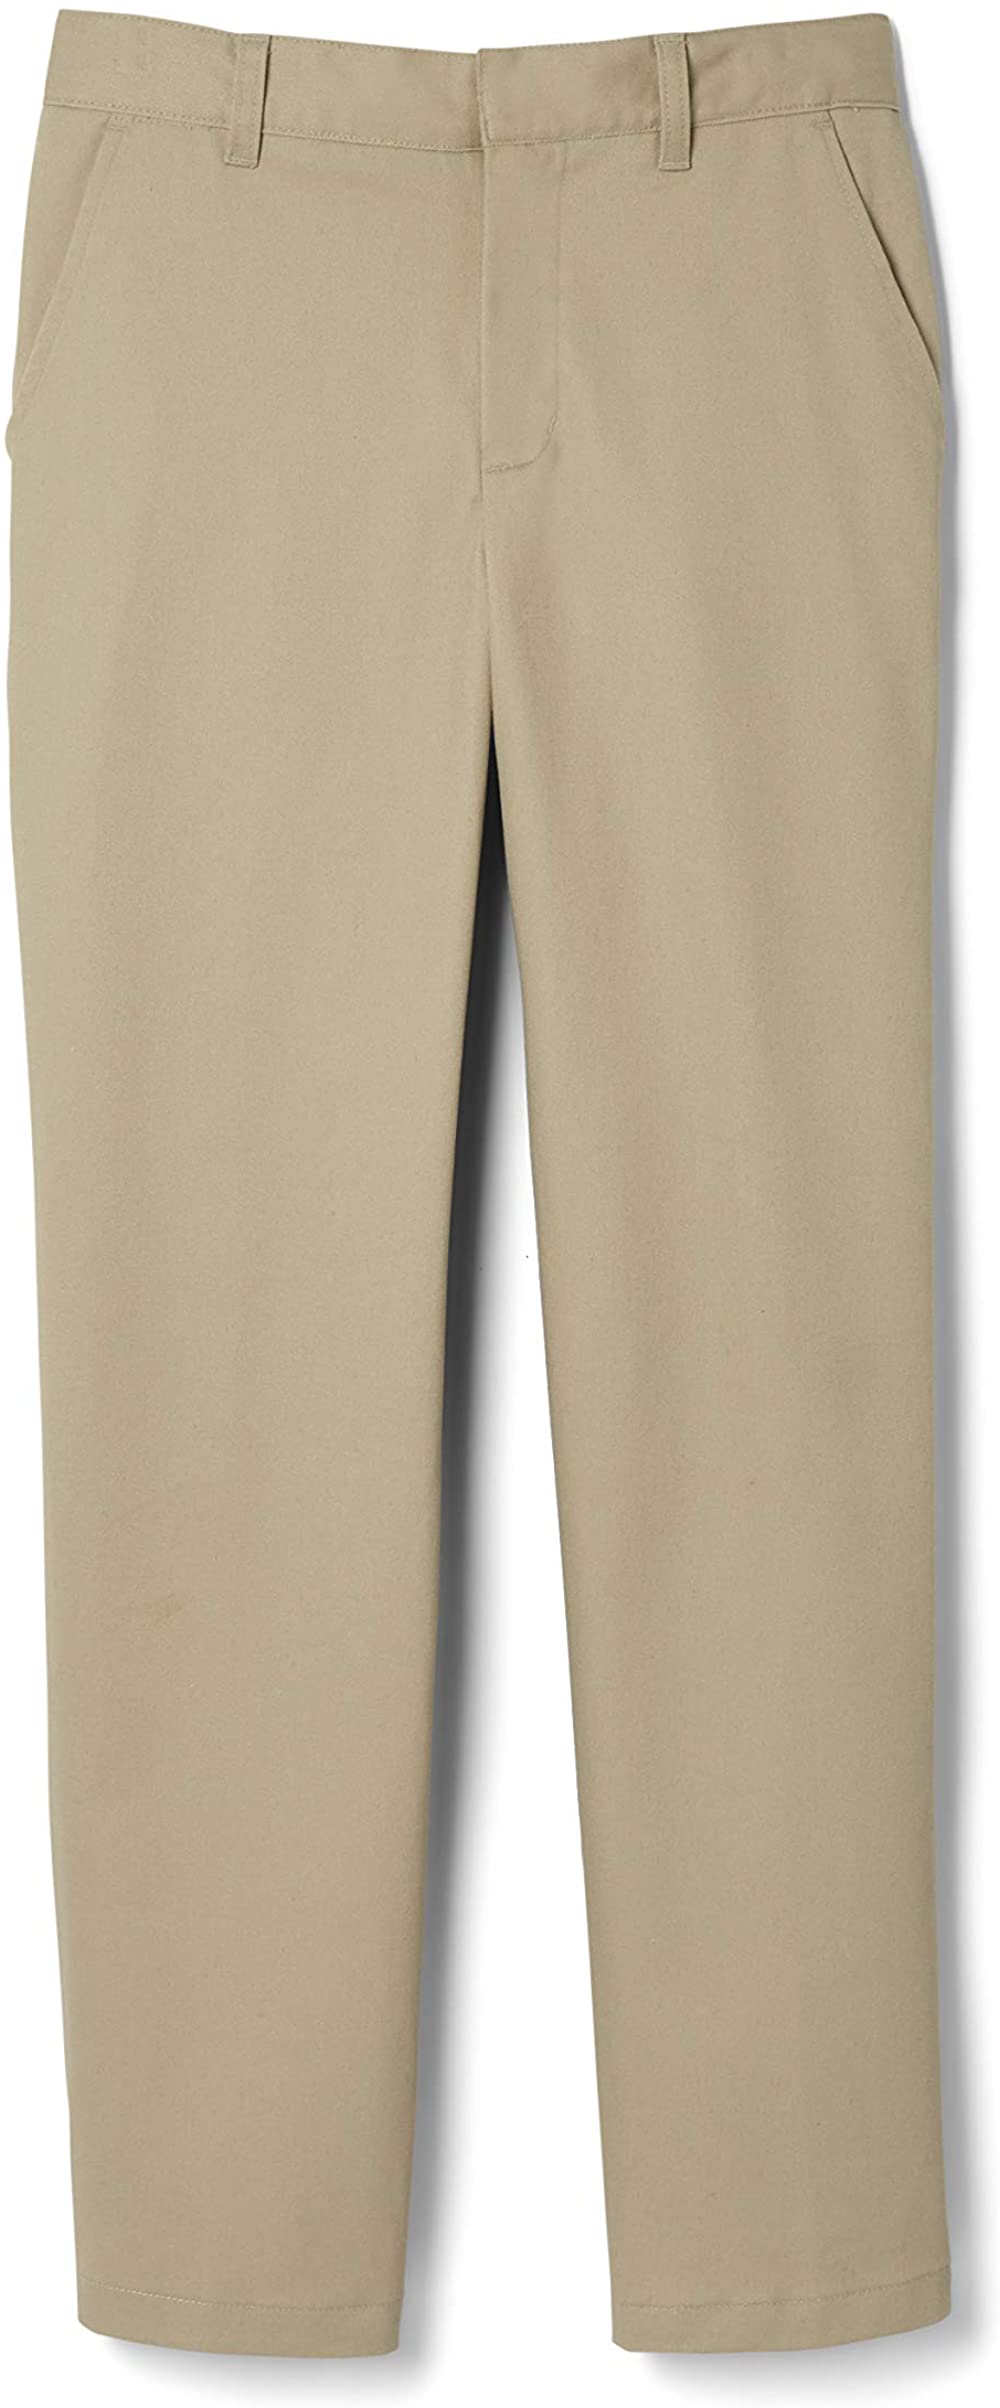 French Toast Big Kid Boys Flat Front Double Knee Pants